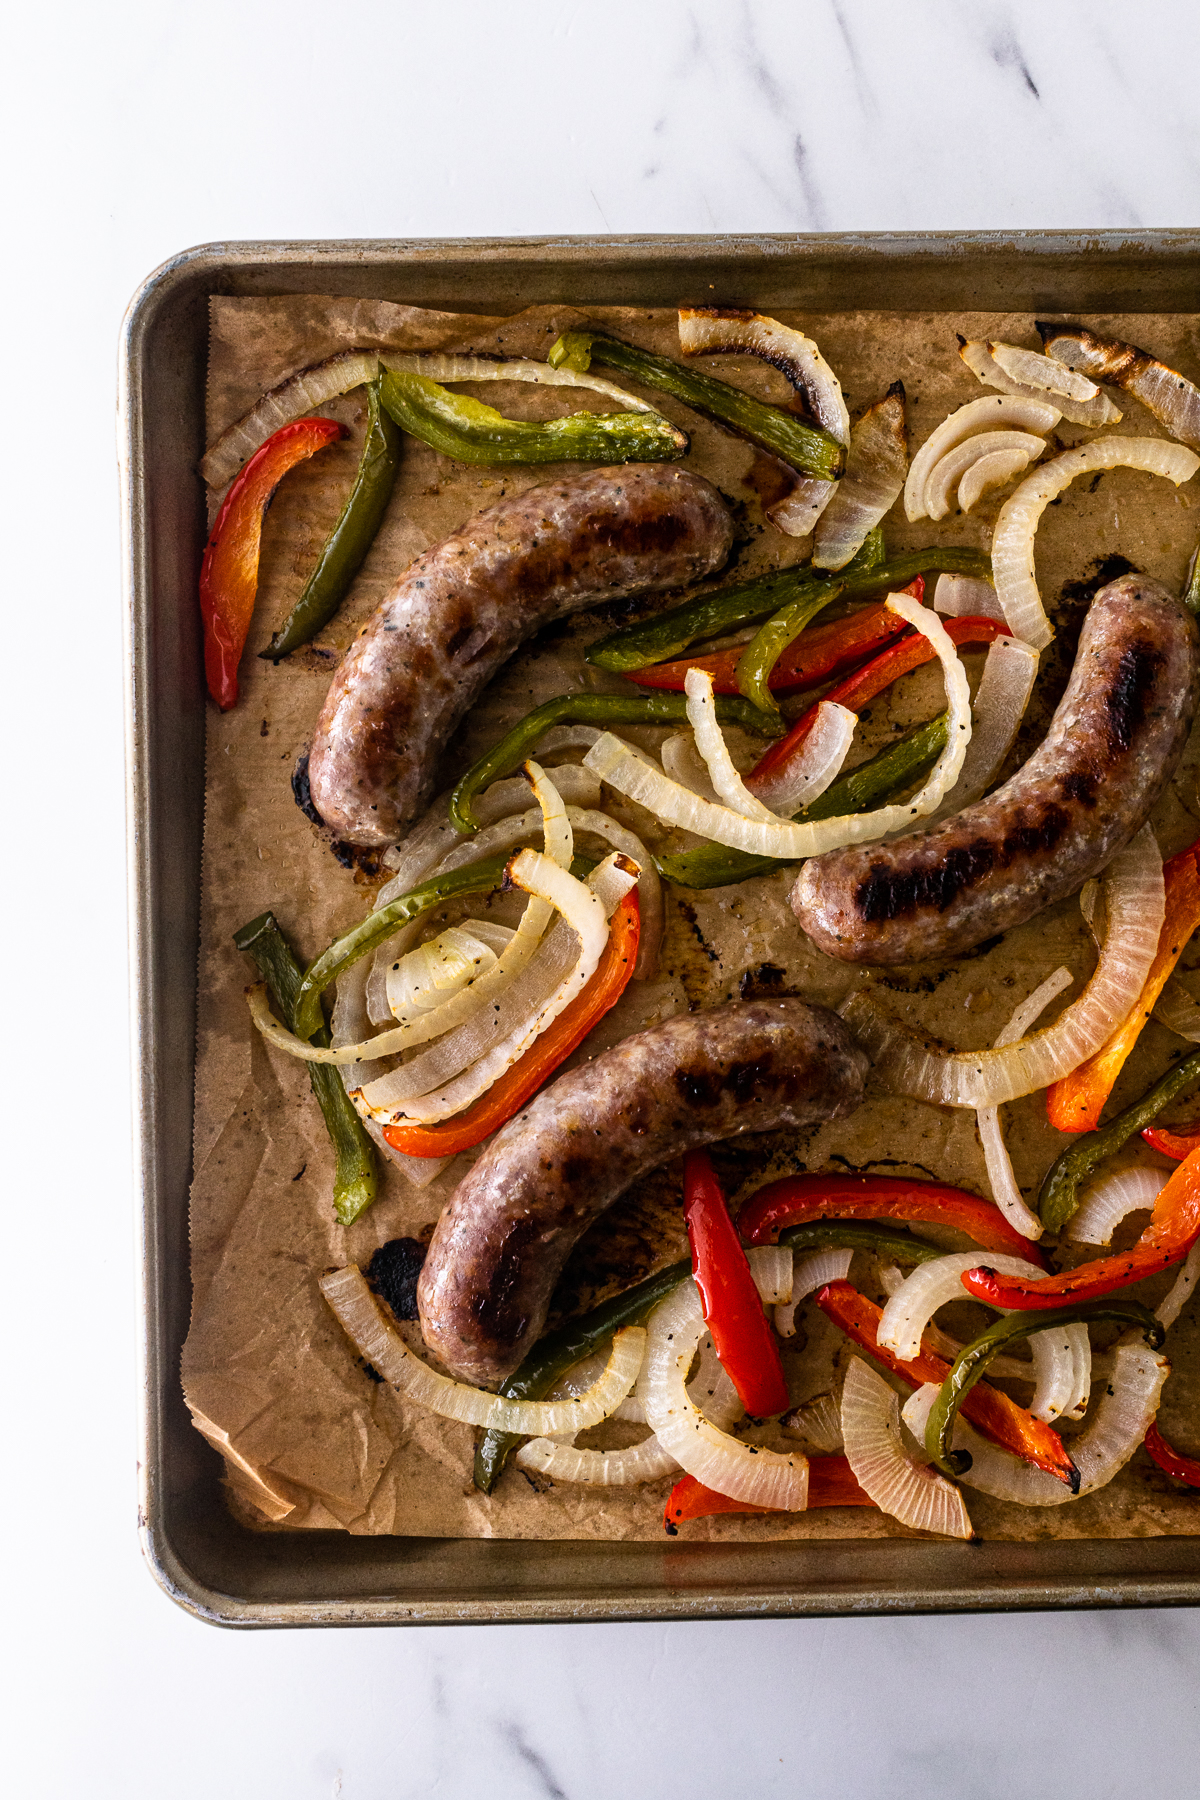 cooked Italian sausage and peppers on a sheet pan.